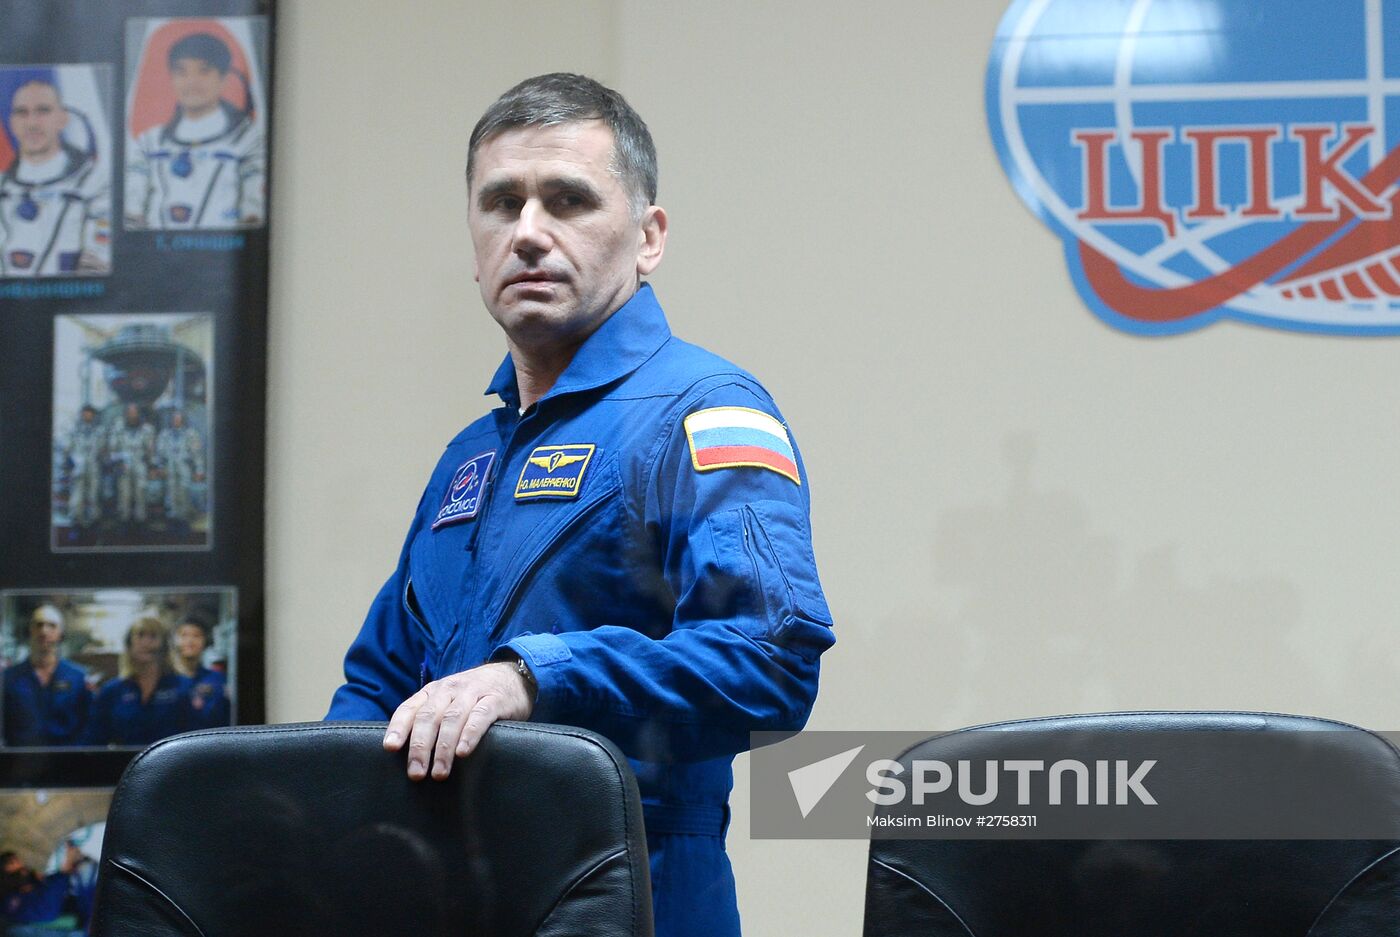 News conference with Soyuz TMA-19M spacecraft crew at Baikonur Cosmodrome